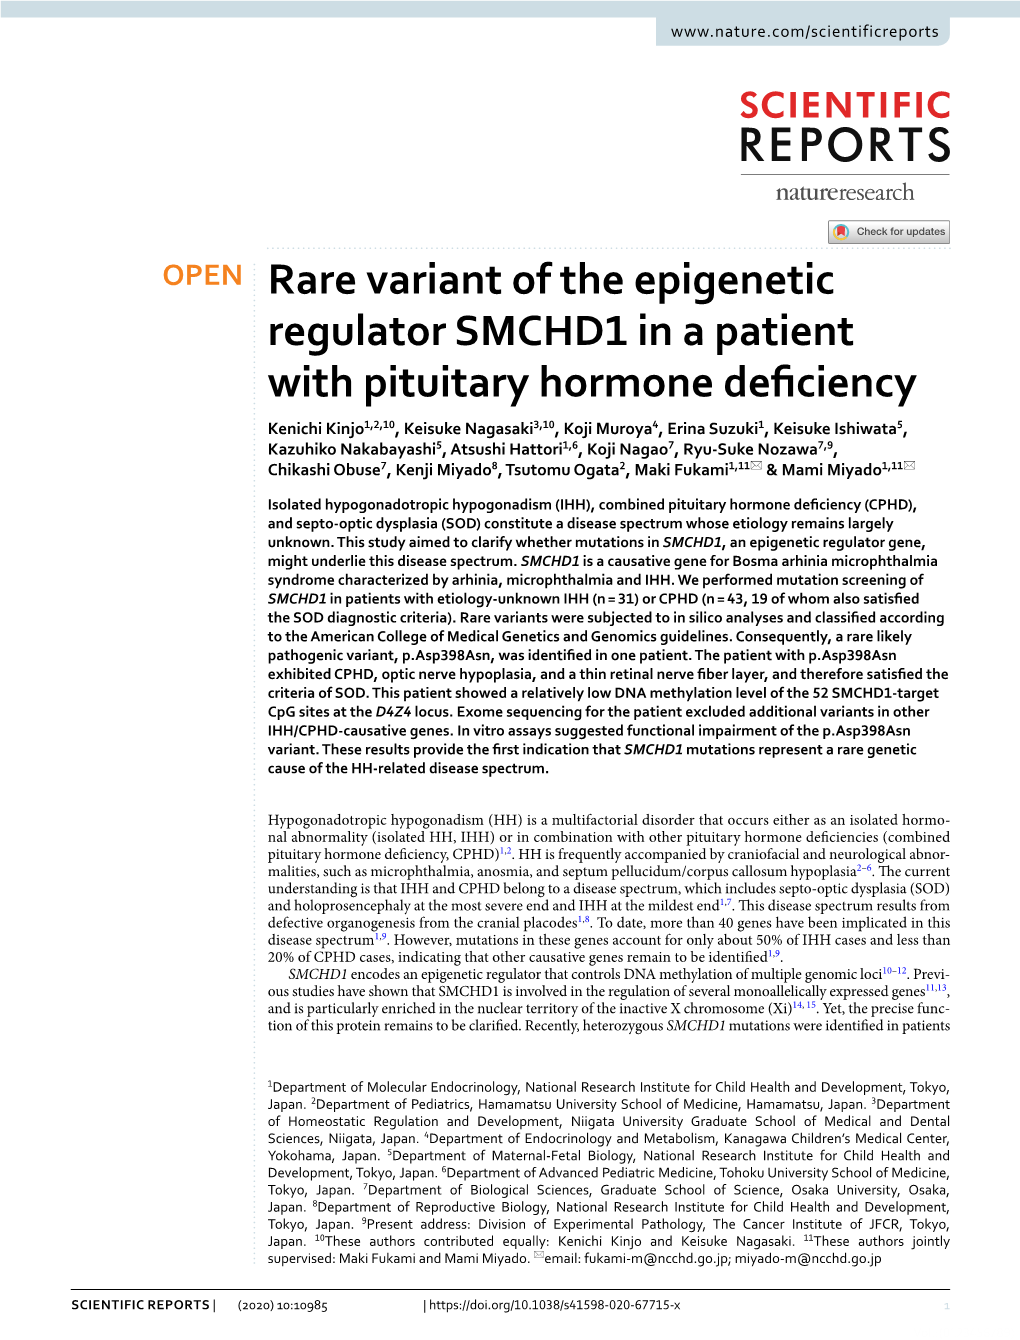 Rare Variant of the Epigenetic Regulator SMCHD1 in a Patient With